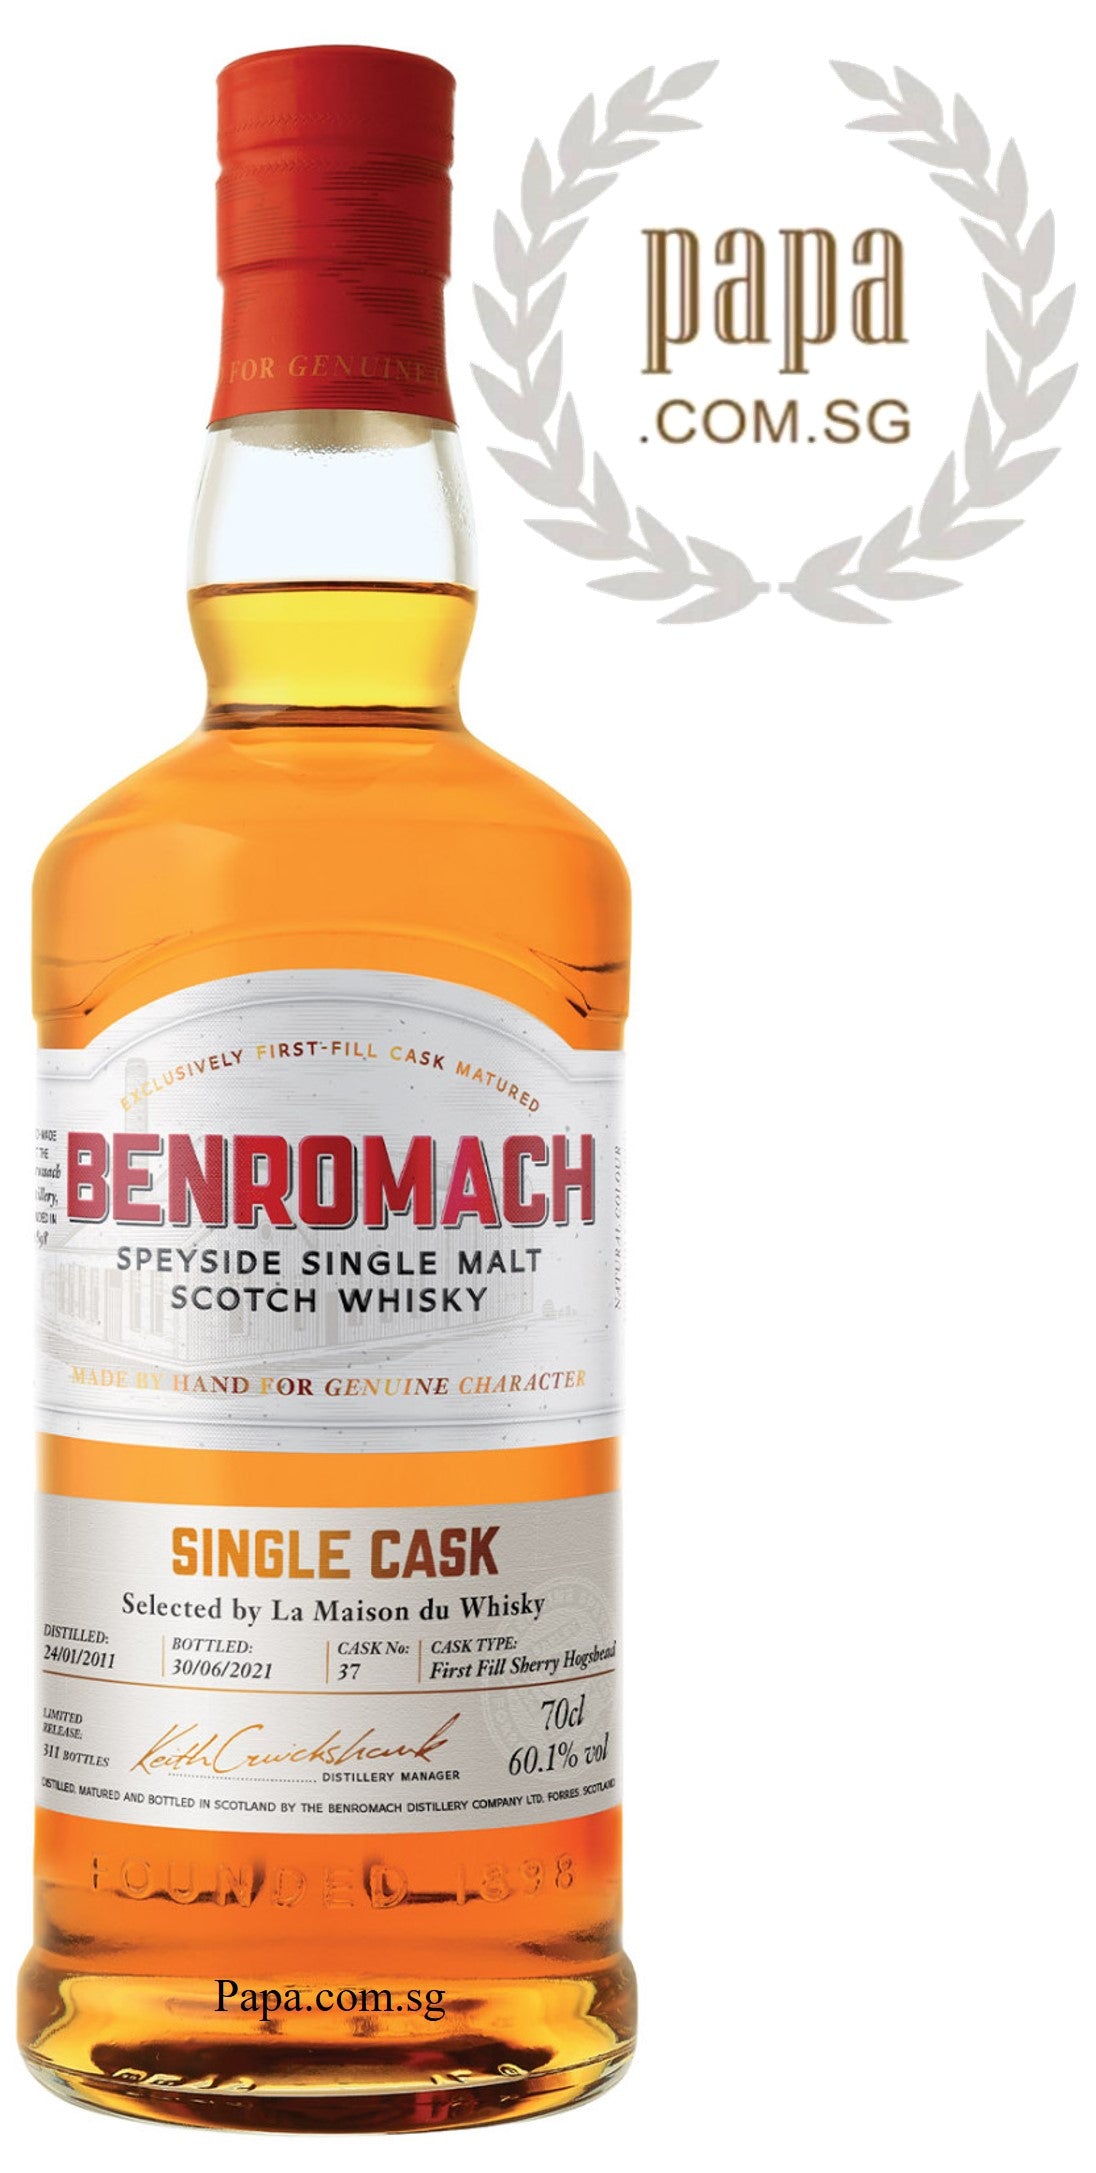 Benromach 10 Years Single Malt - Exclusively 1st Fill Cask Matured - CASK STRENGTH - 2021 Limited Release 60.1% abv